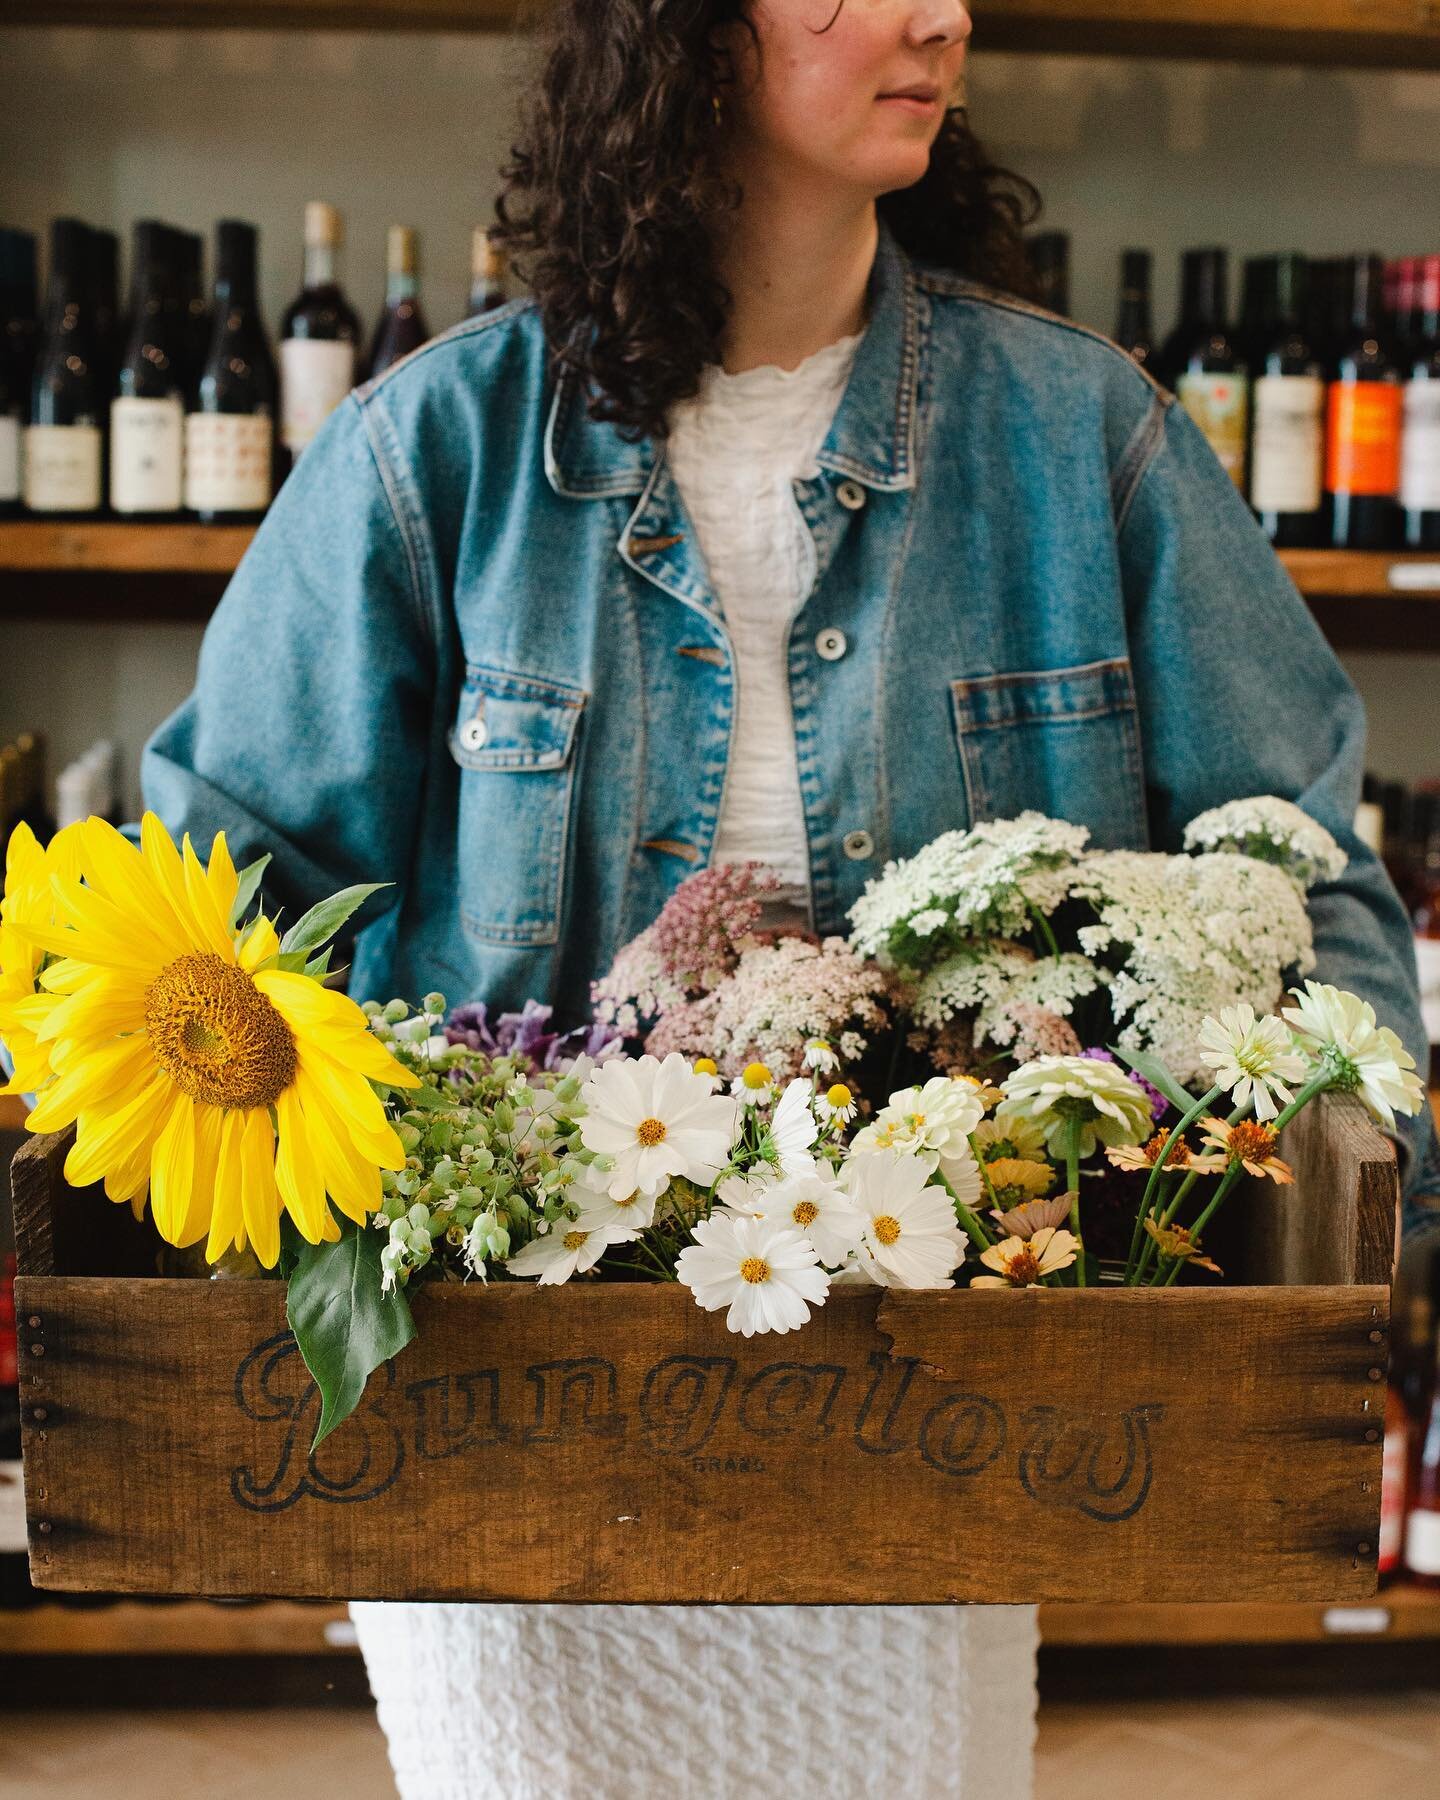 Fresh, local flowers are available today to brighten up this rainy Sunday! Come grab a bouquet of sweet peas, cosmos, Queen Ann&rsquo;s lace, zinnias and olive branches from @_amandachurchill_ &lsquo;s beautiful garden 

Open 12:30-6pm